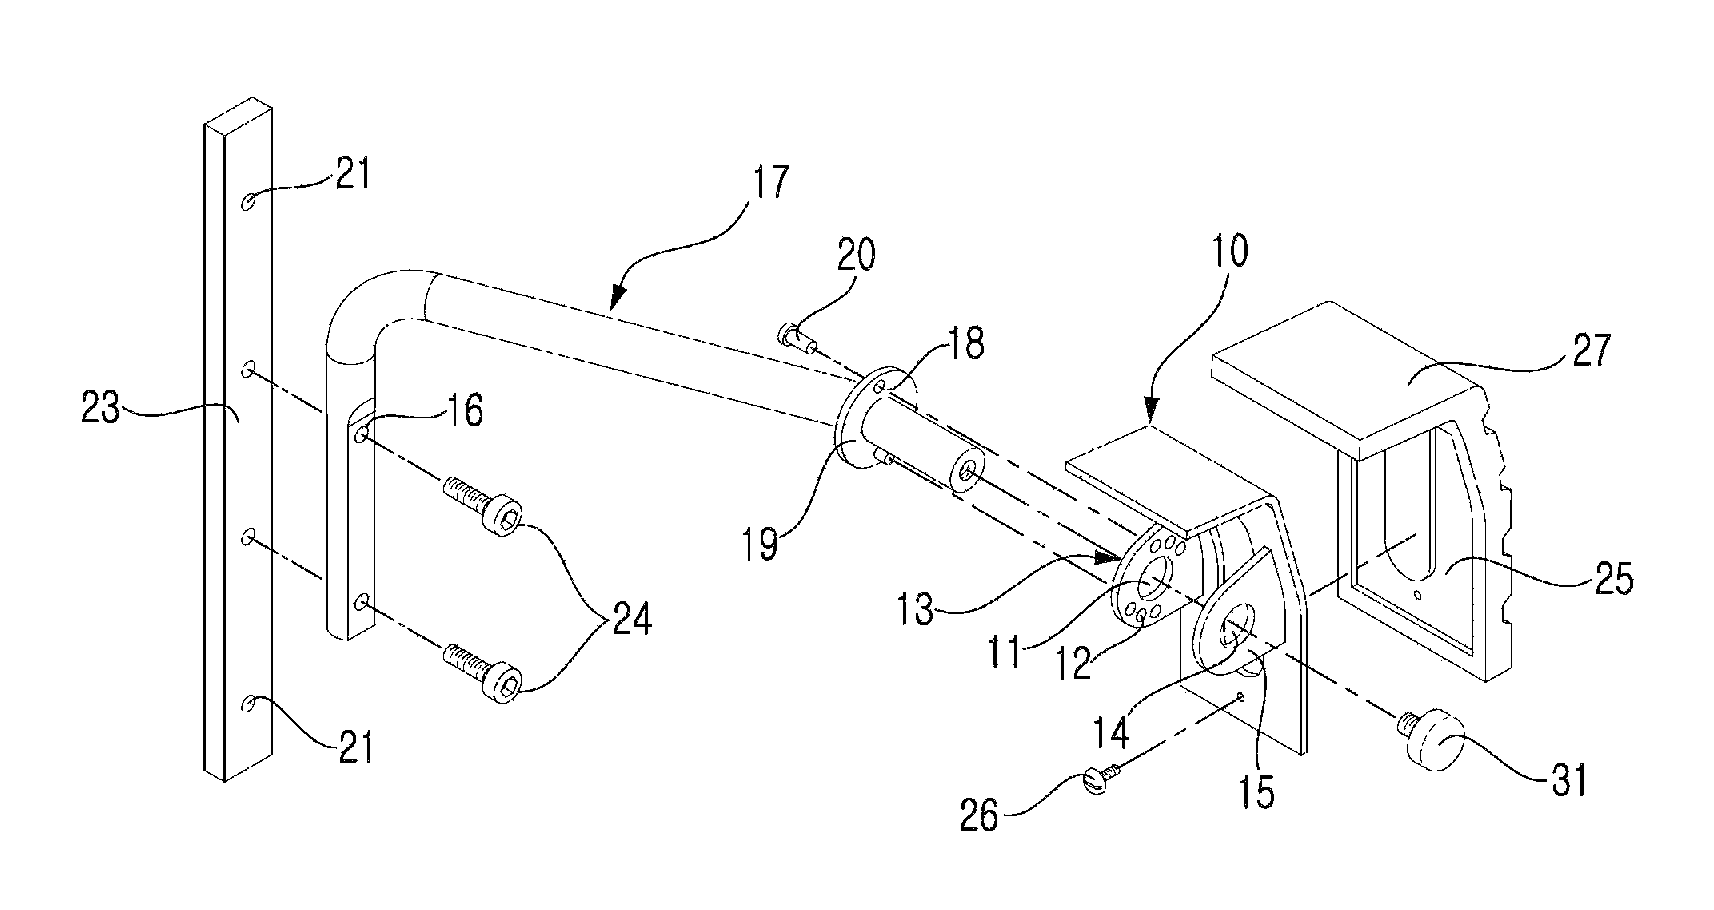 Apparatus for adjusting height and angle of footrest support for construction equipment